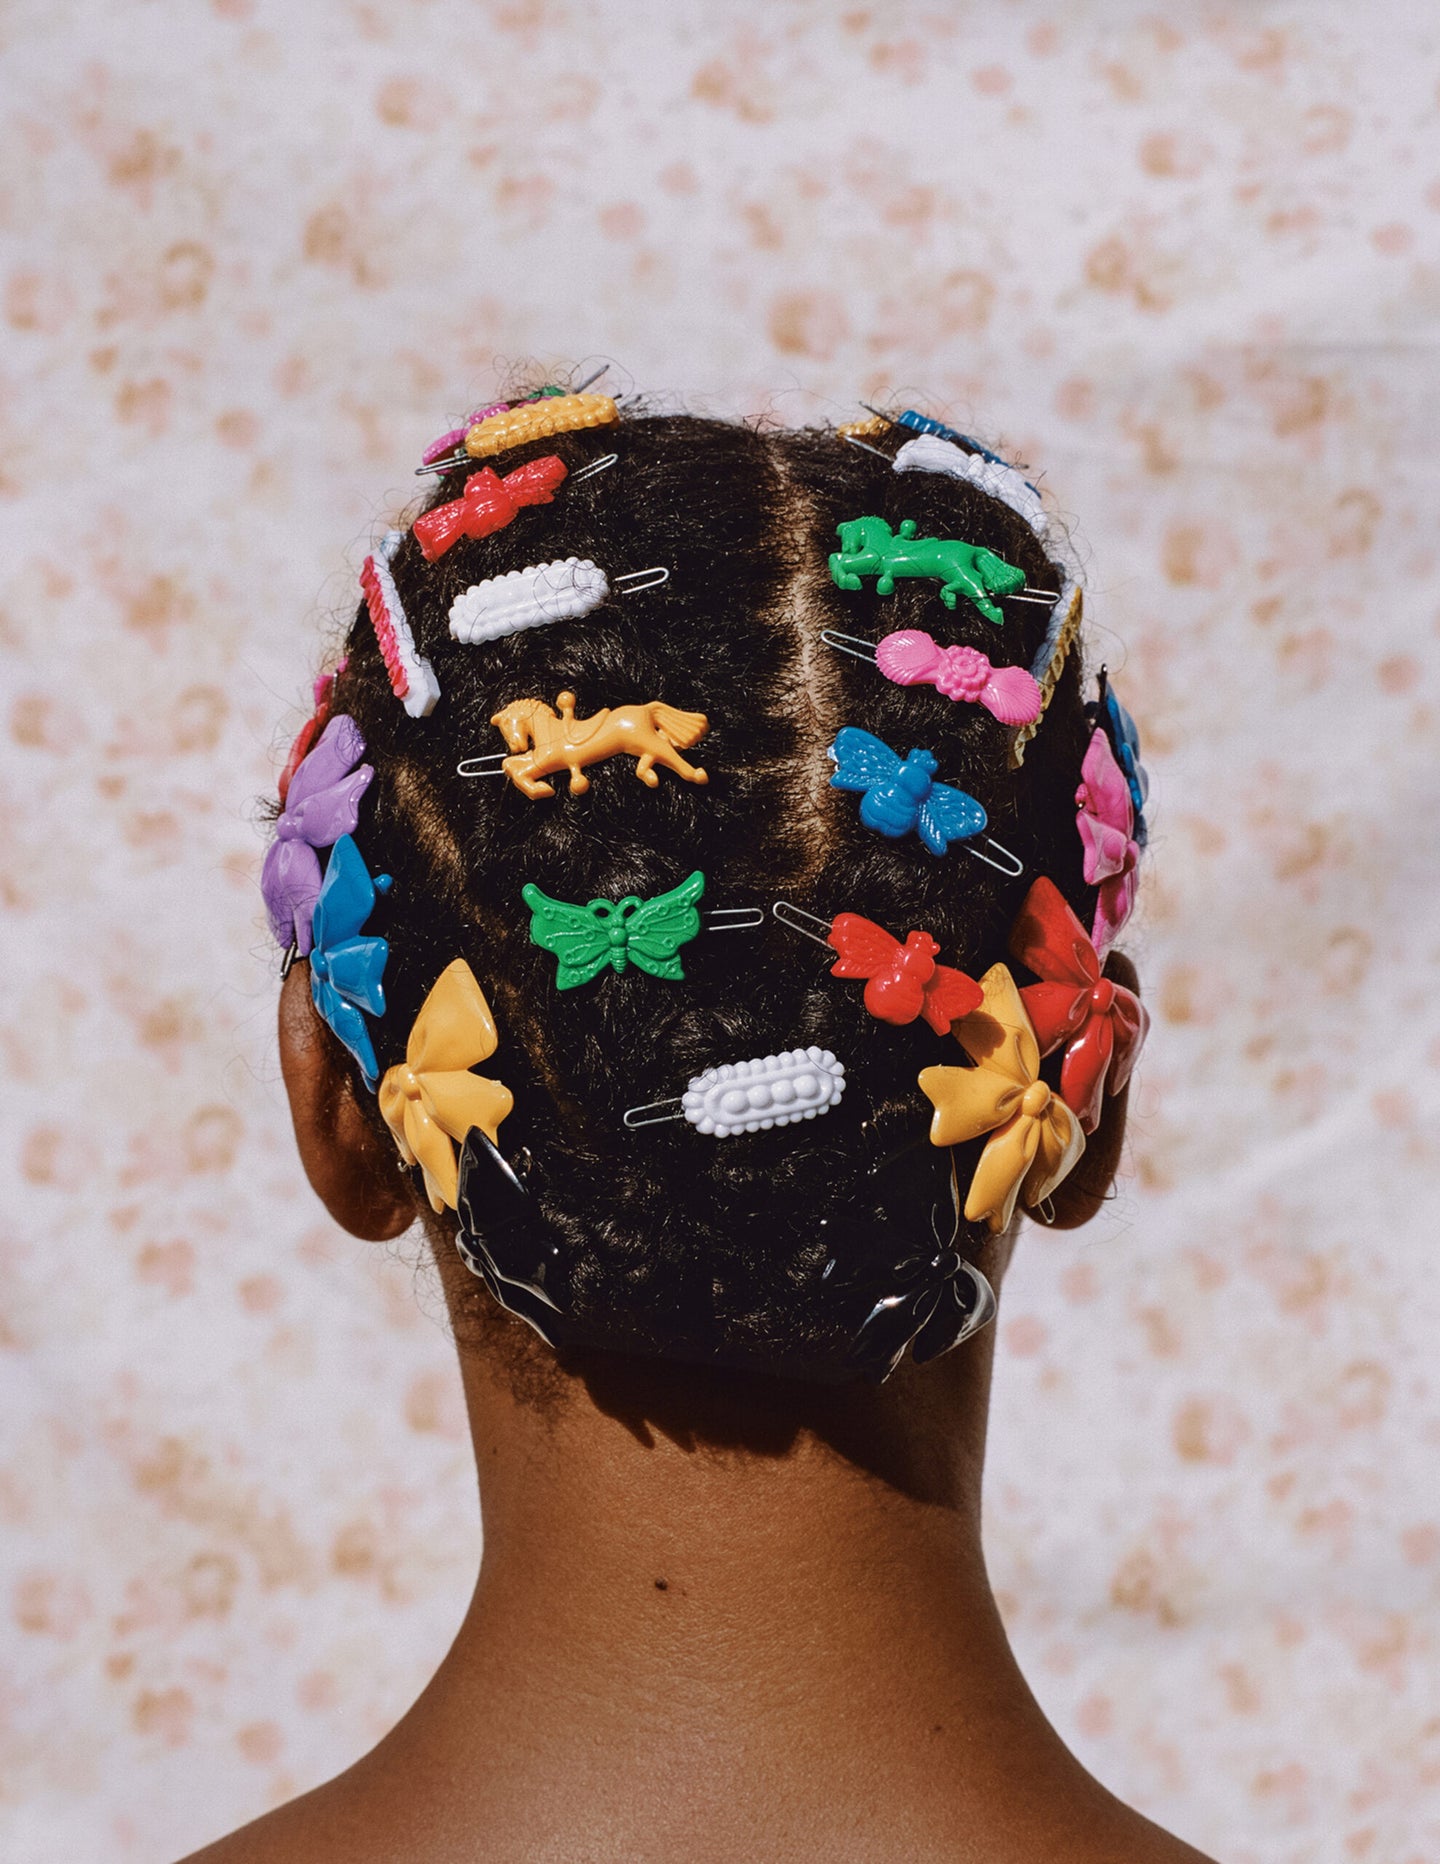 Adeline in Barrettes, 2018